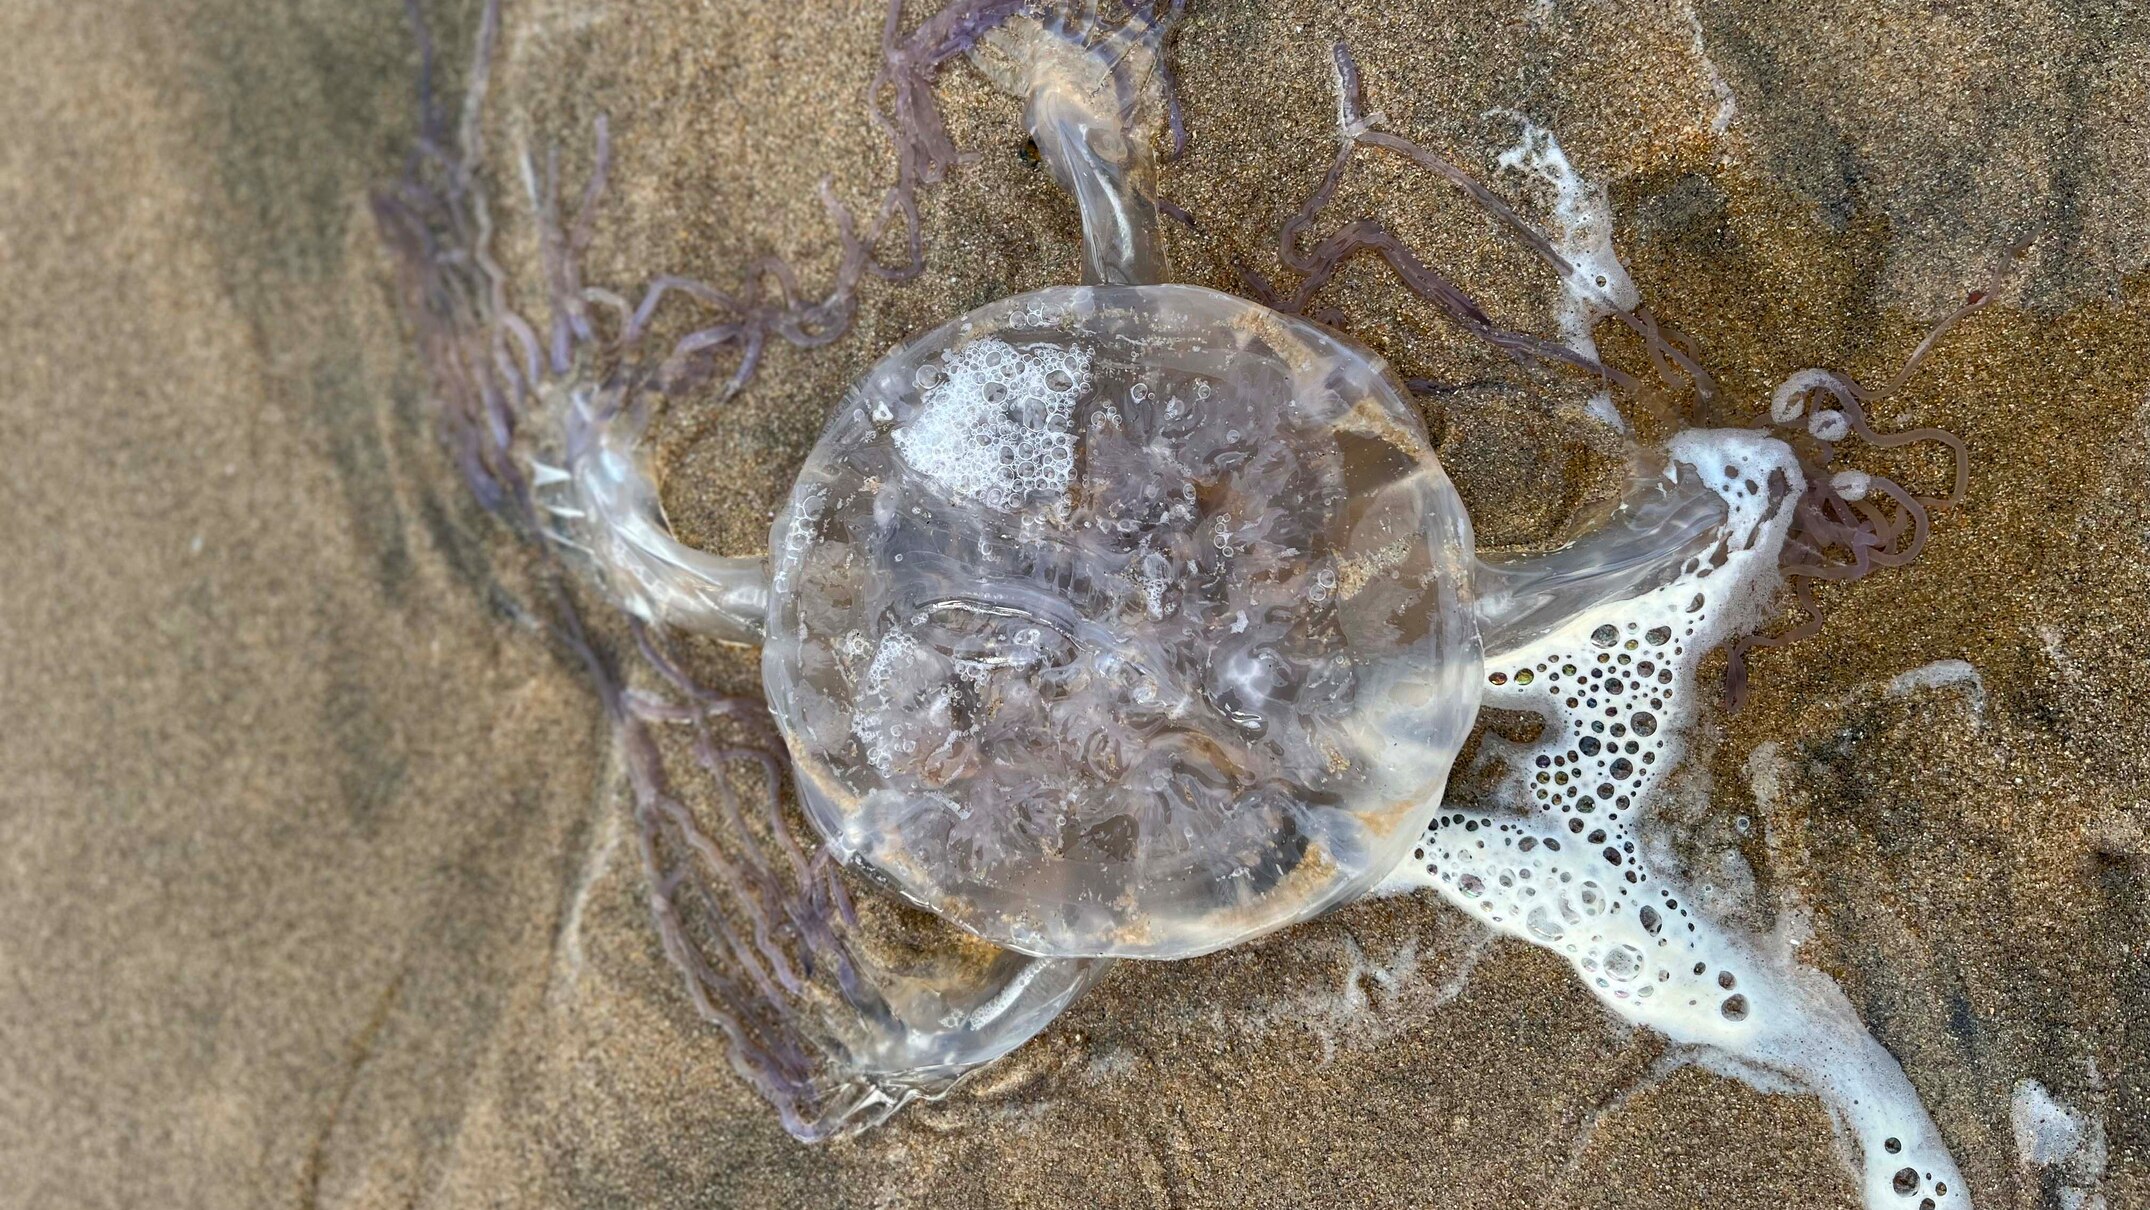 lifesaver urges north queensland swimmers to wear stinger suits as deadly box jellyfish wash up